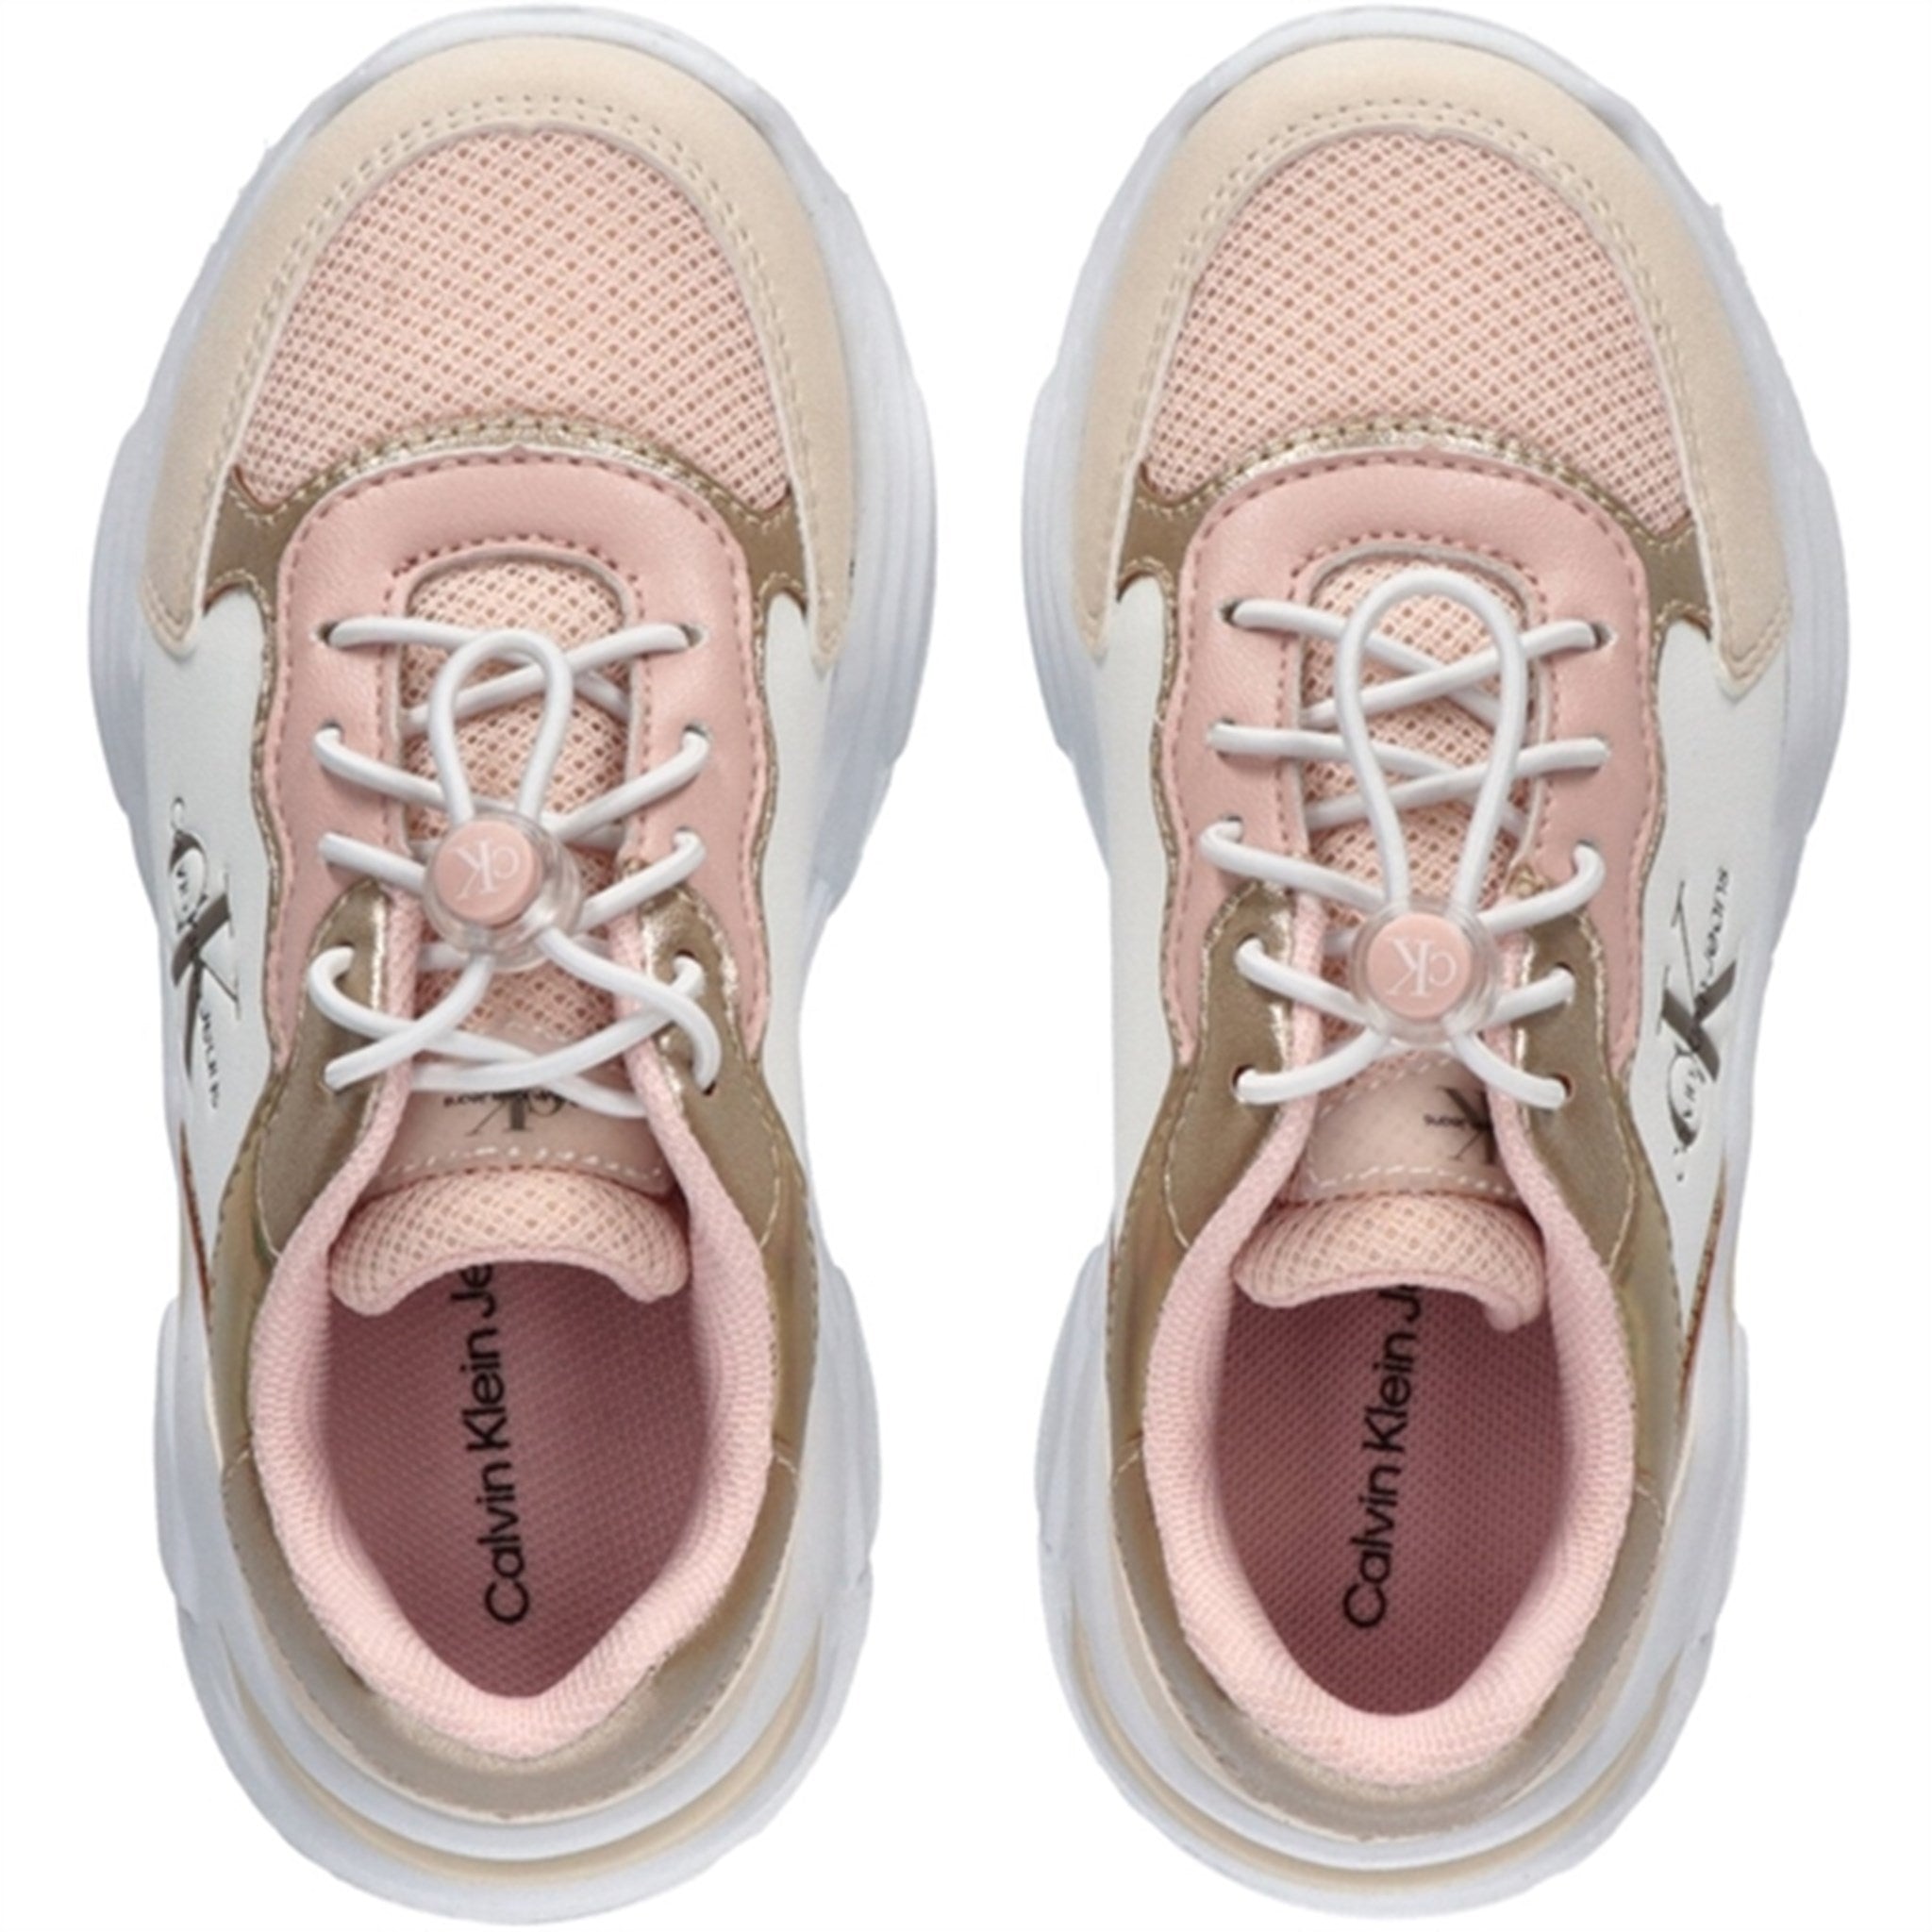 Calvin Klein Low Cut Lace-Up Sneakers Beige/Nude/White